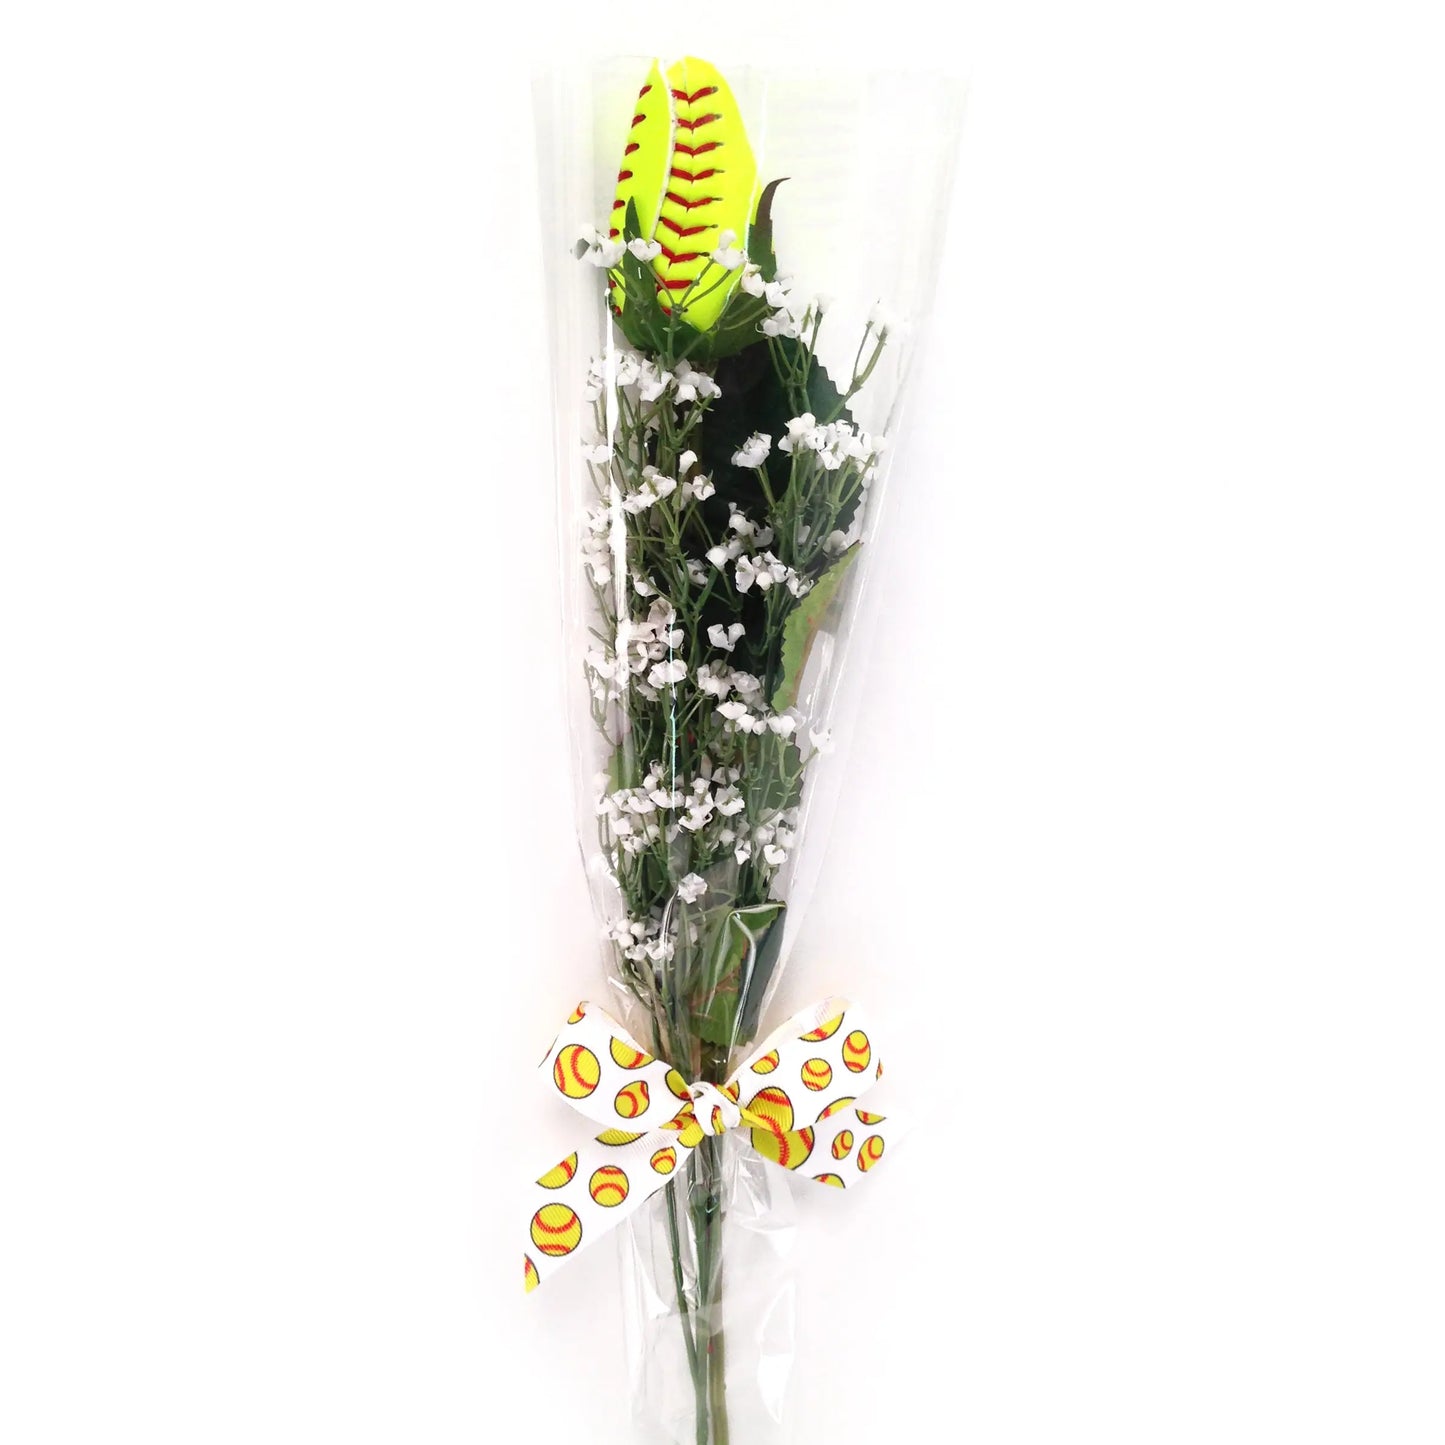 Softball Rose with Graduation Class Year Sports Roses  